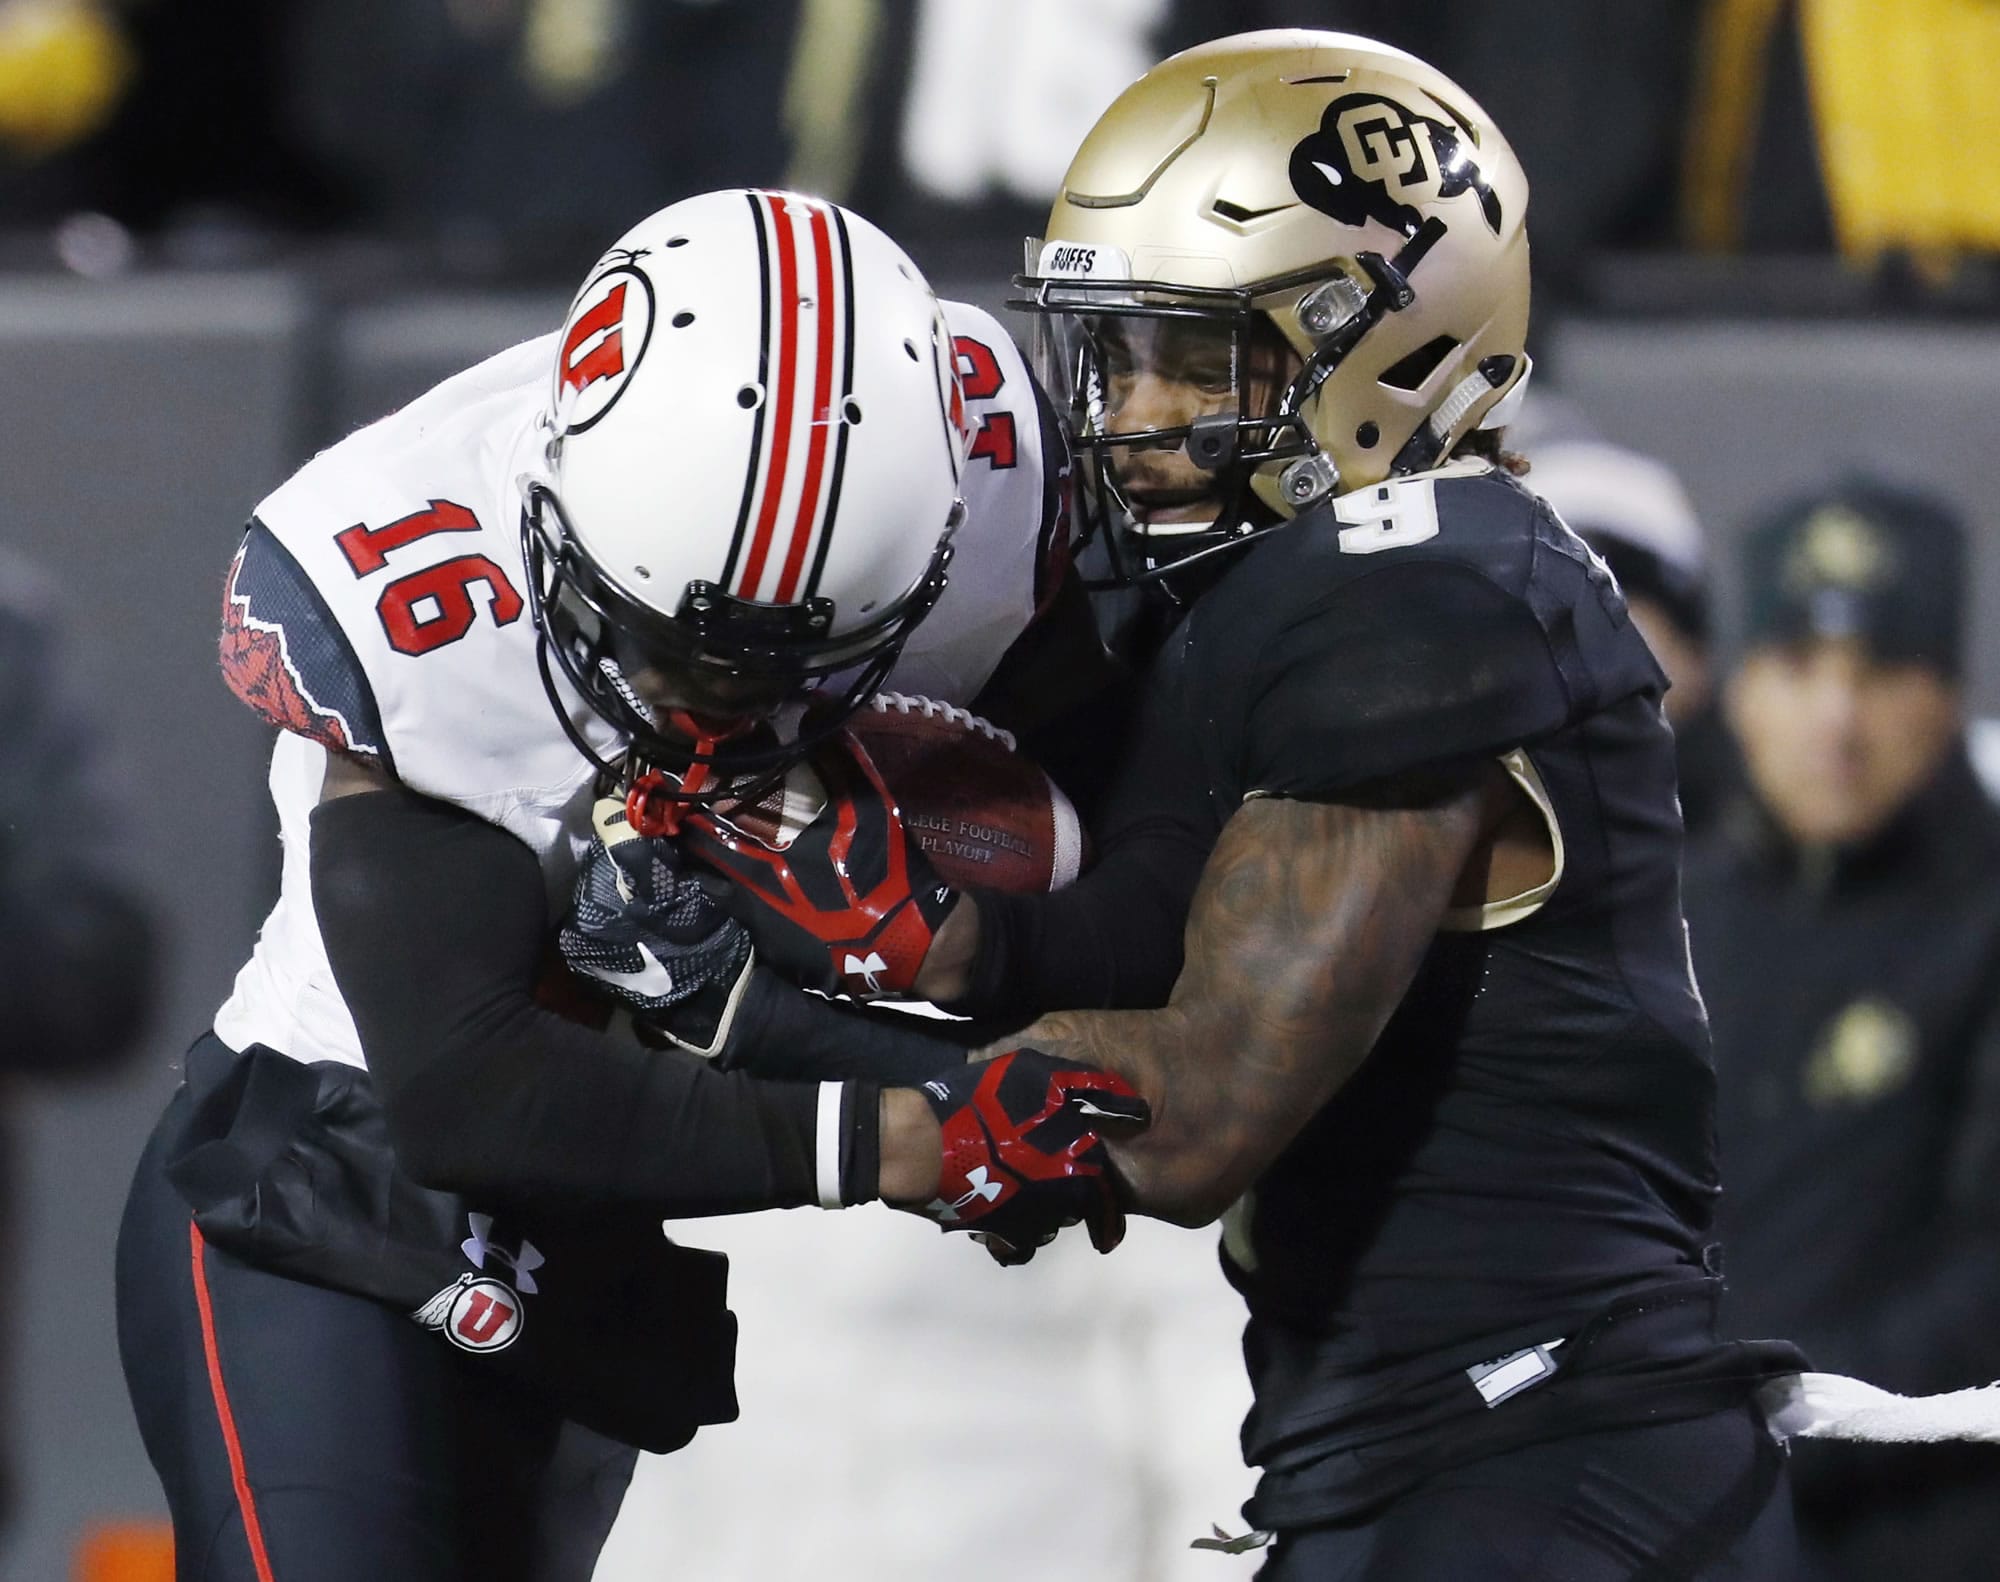 Colorado defensive back Tedric Thompson, right, was selected by the Seattle Seahawks in the fourth round of the NFL draft Saturday, April 29.